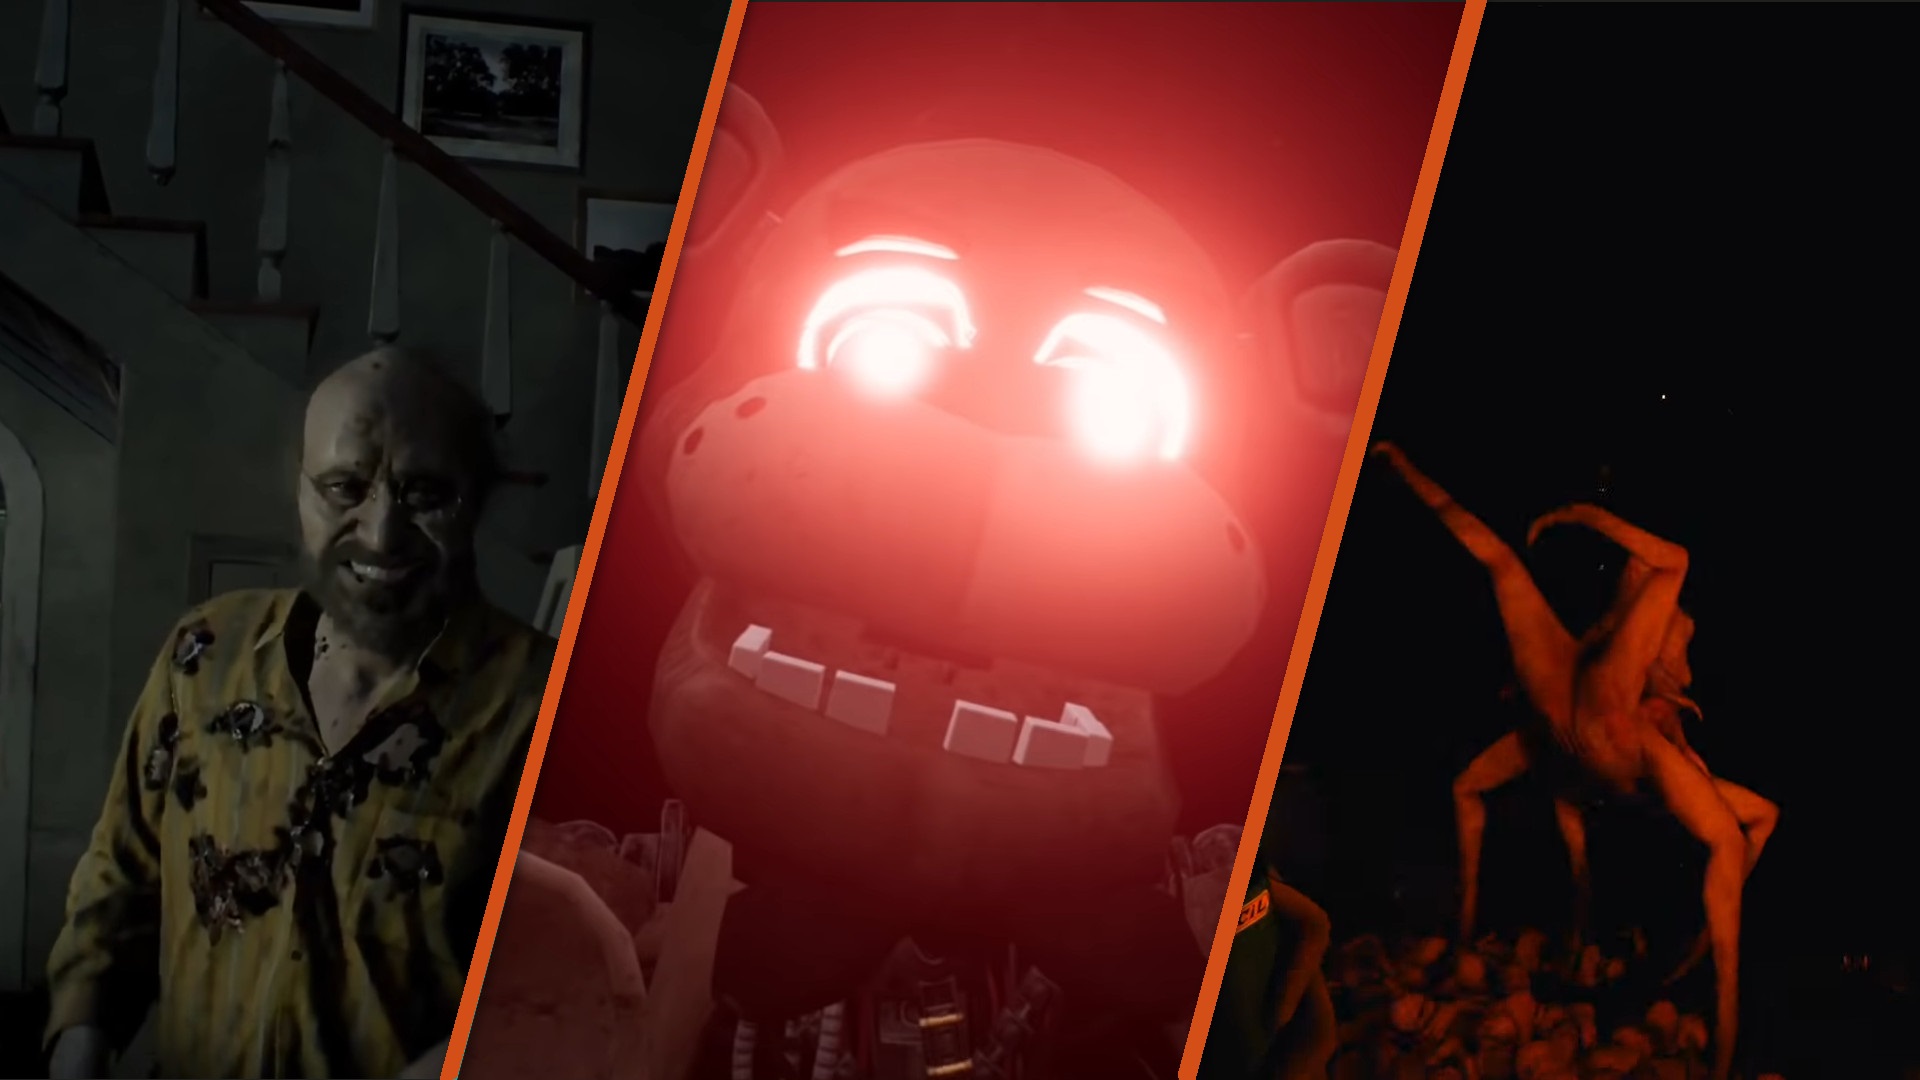 Five Night's At Freddy's in Real Life! 360 VIDEO - SCARY! 